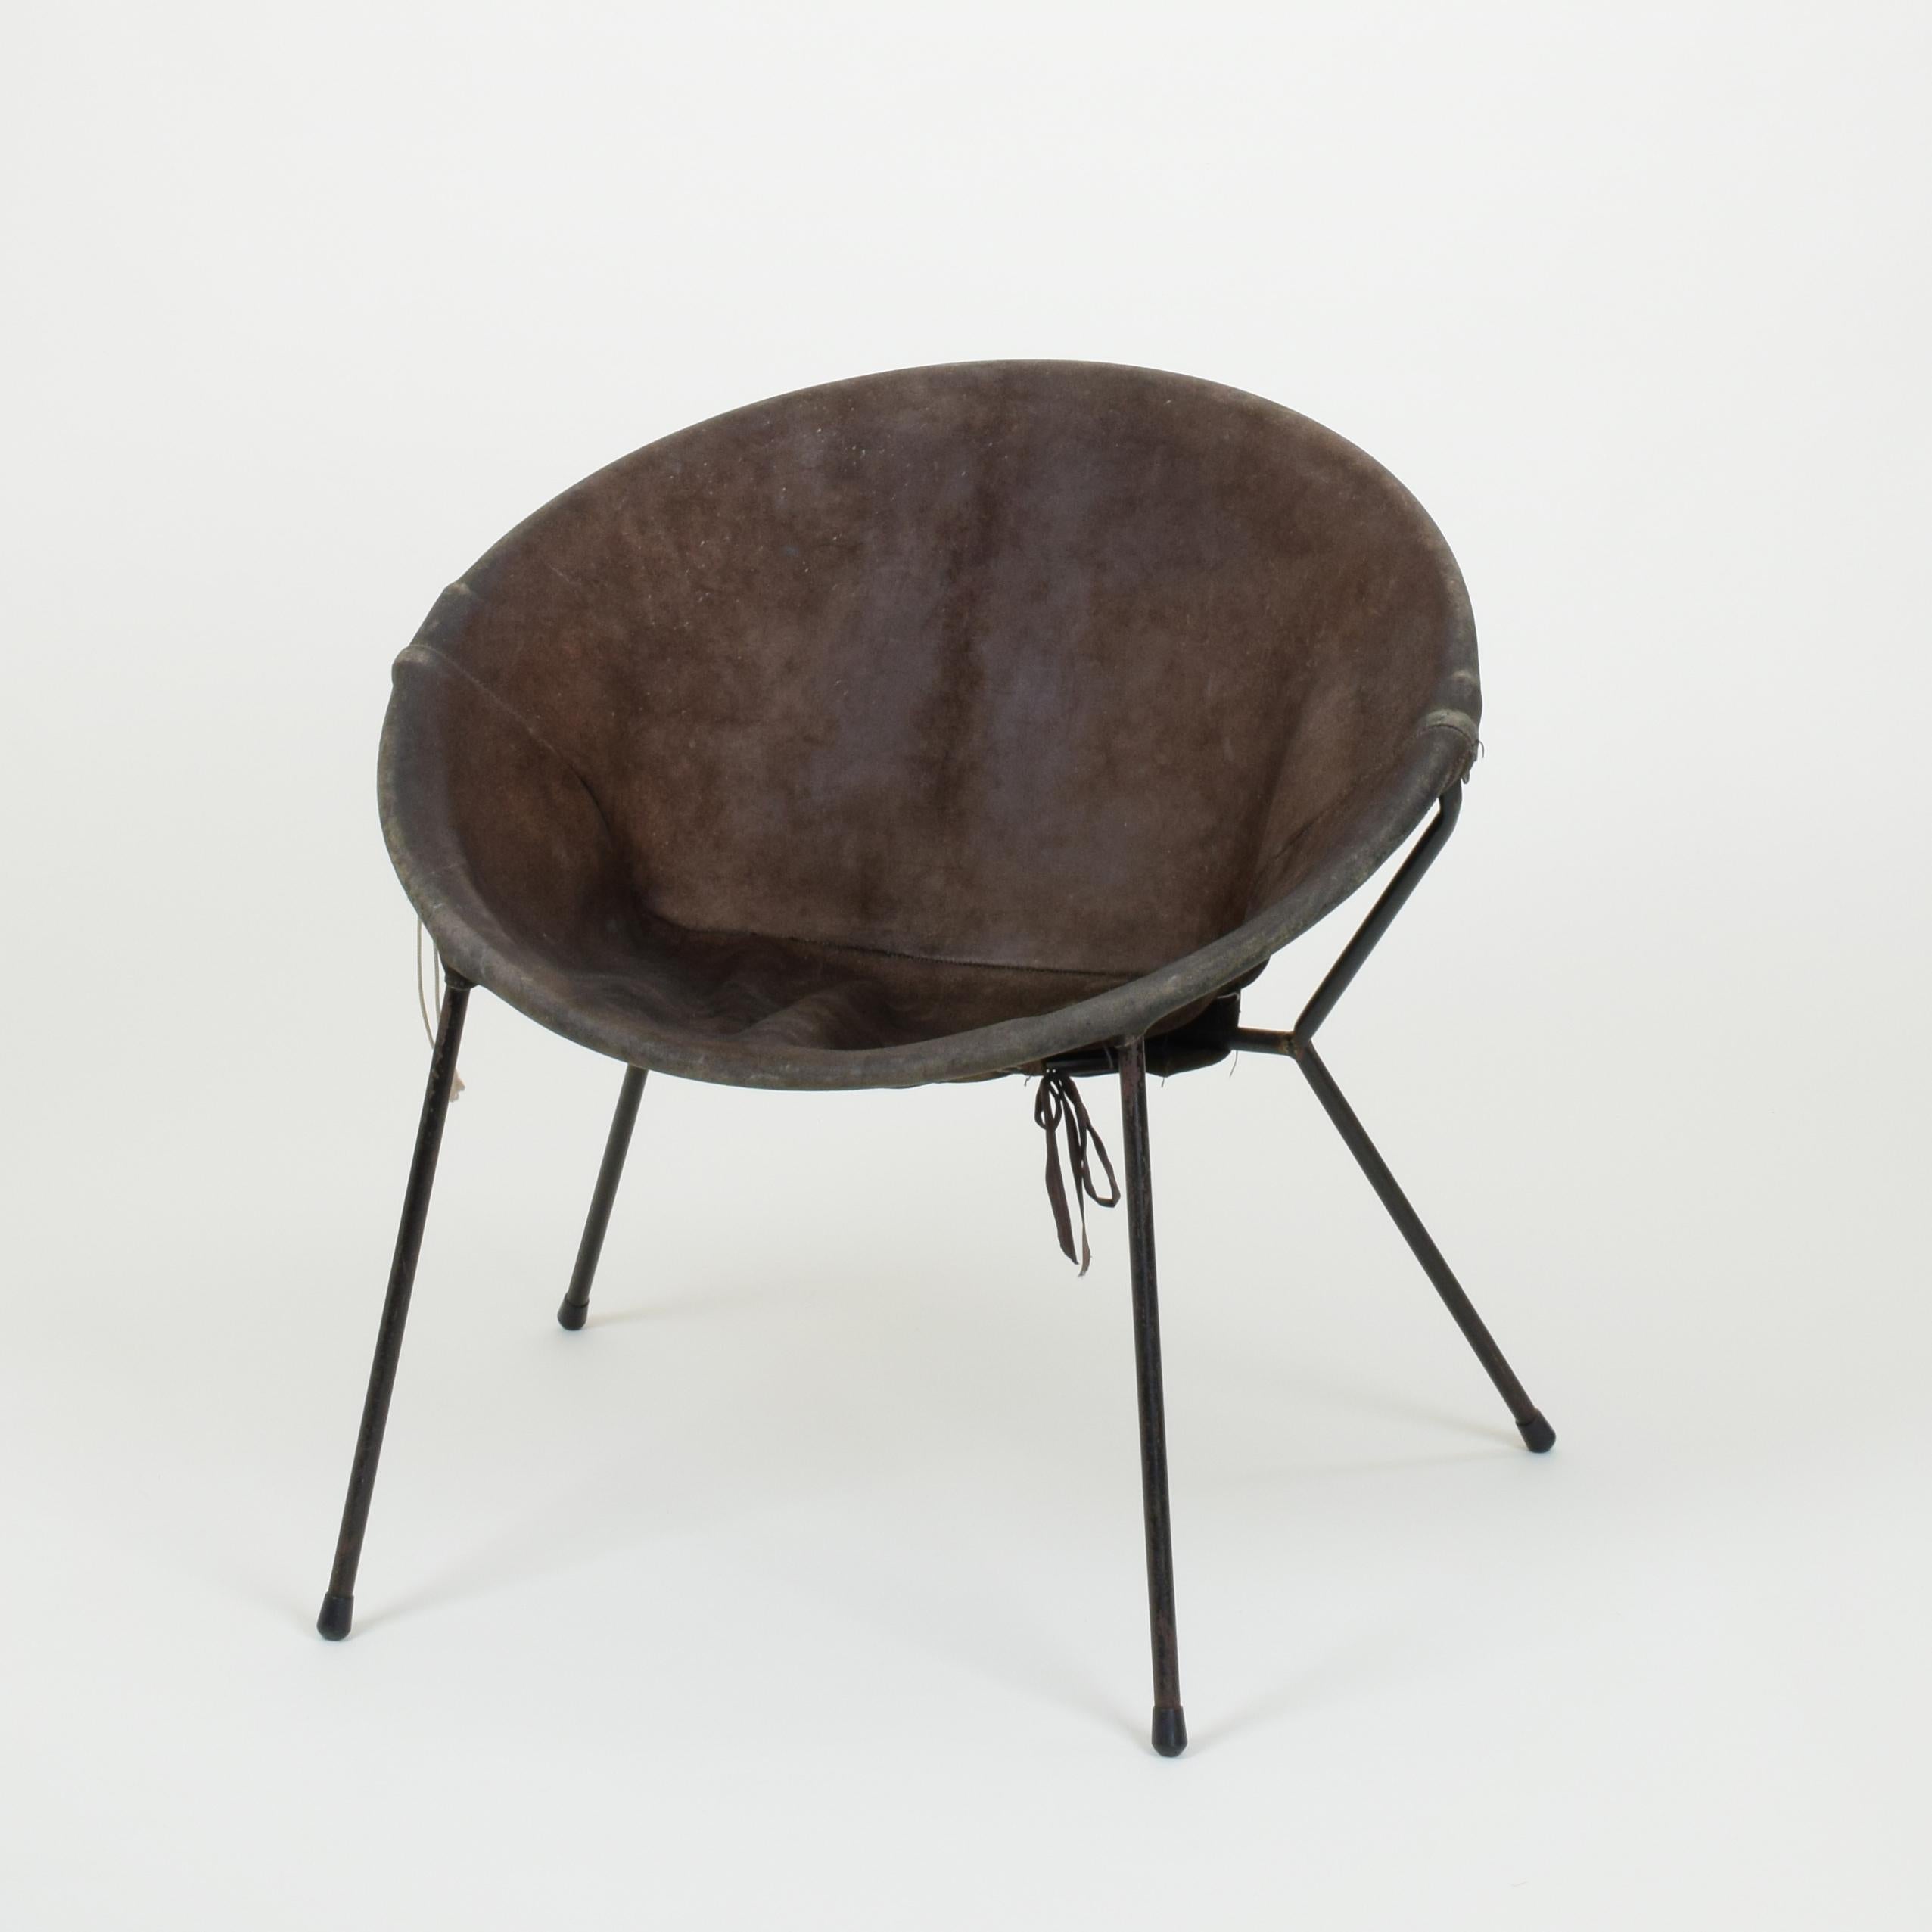 Hans Olsen (designer), Denmark
'Balloon' lounge chair, designed 1955
Black nubuck leather with black metal folding frame.
A design classic, and a comfortable and fully useable lounge chair in a similar mid-century style to the work of Verner